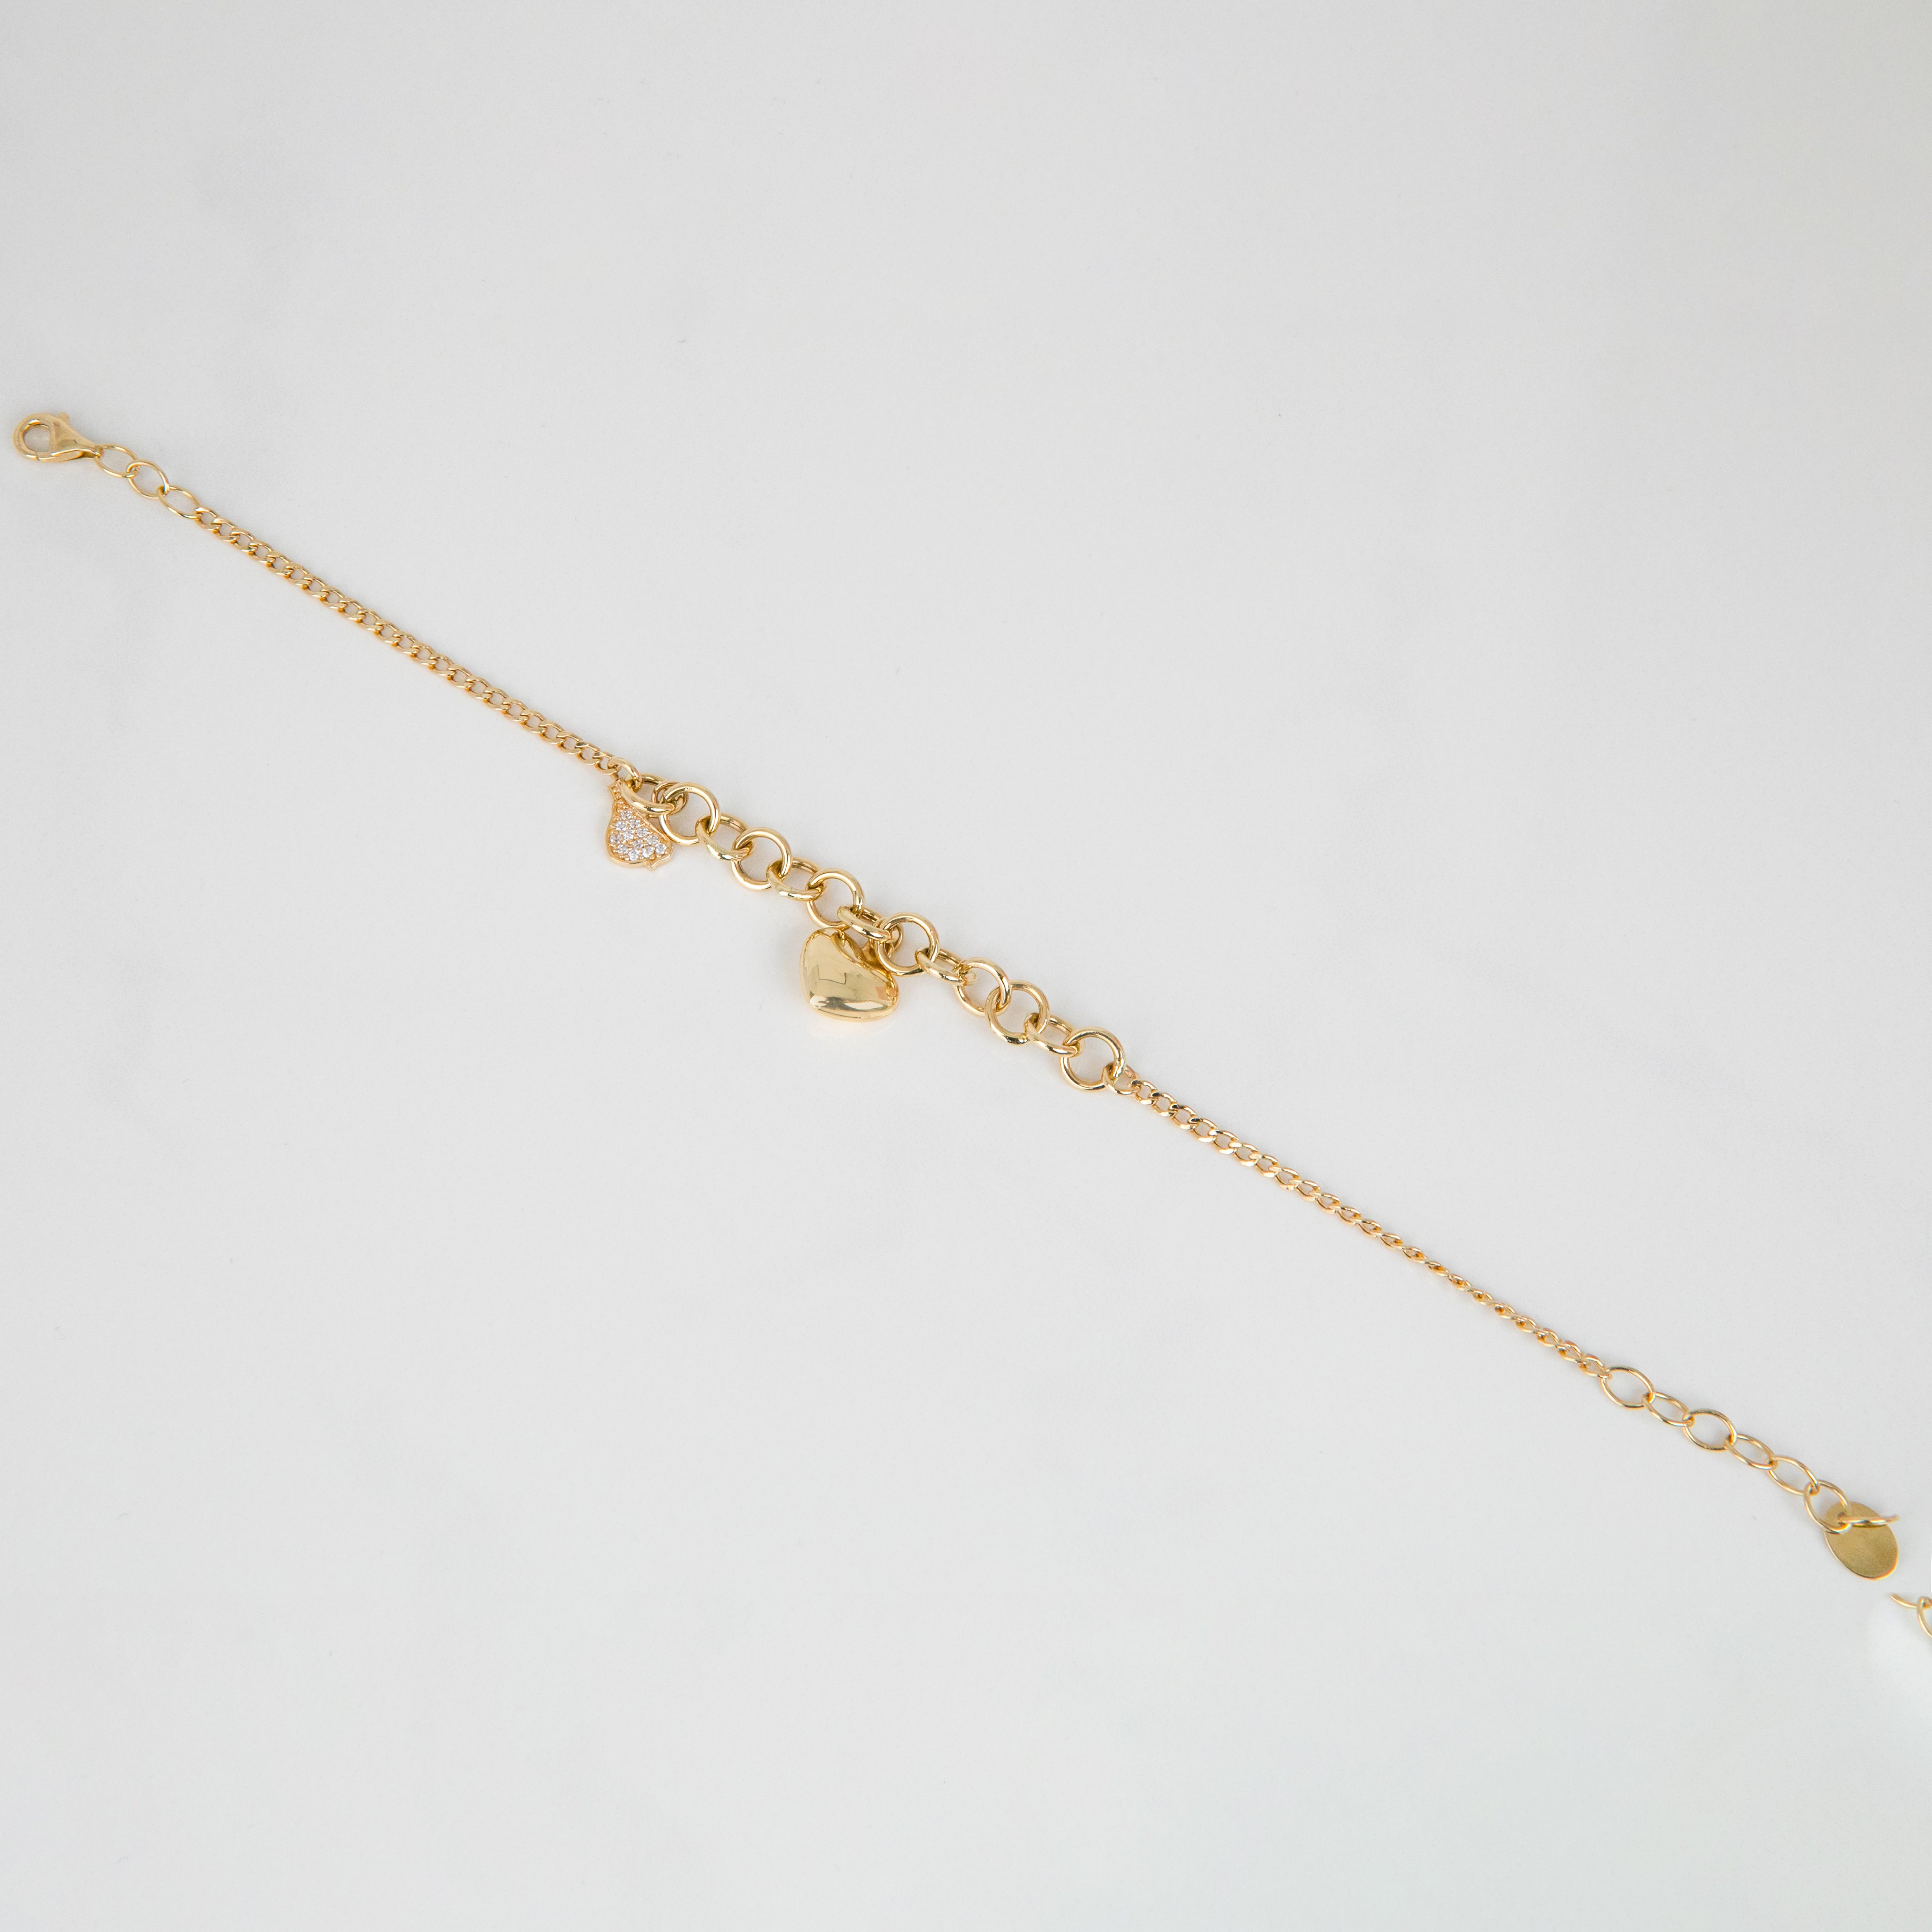 Contemporary 14k Gold Bracelet with Bold Chain, 14k Gold Chain and Heart Sembol Bracelet For Sale